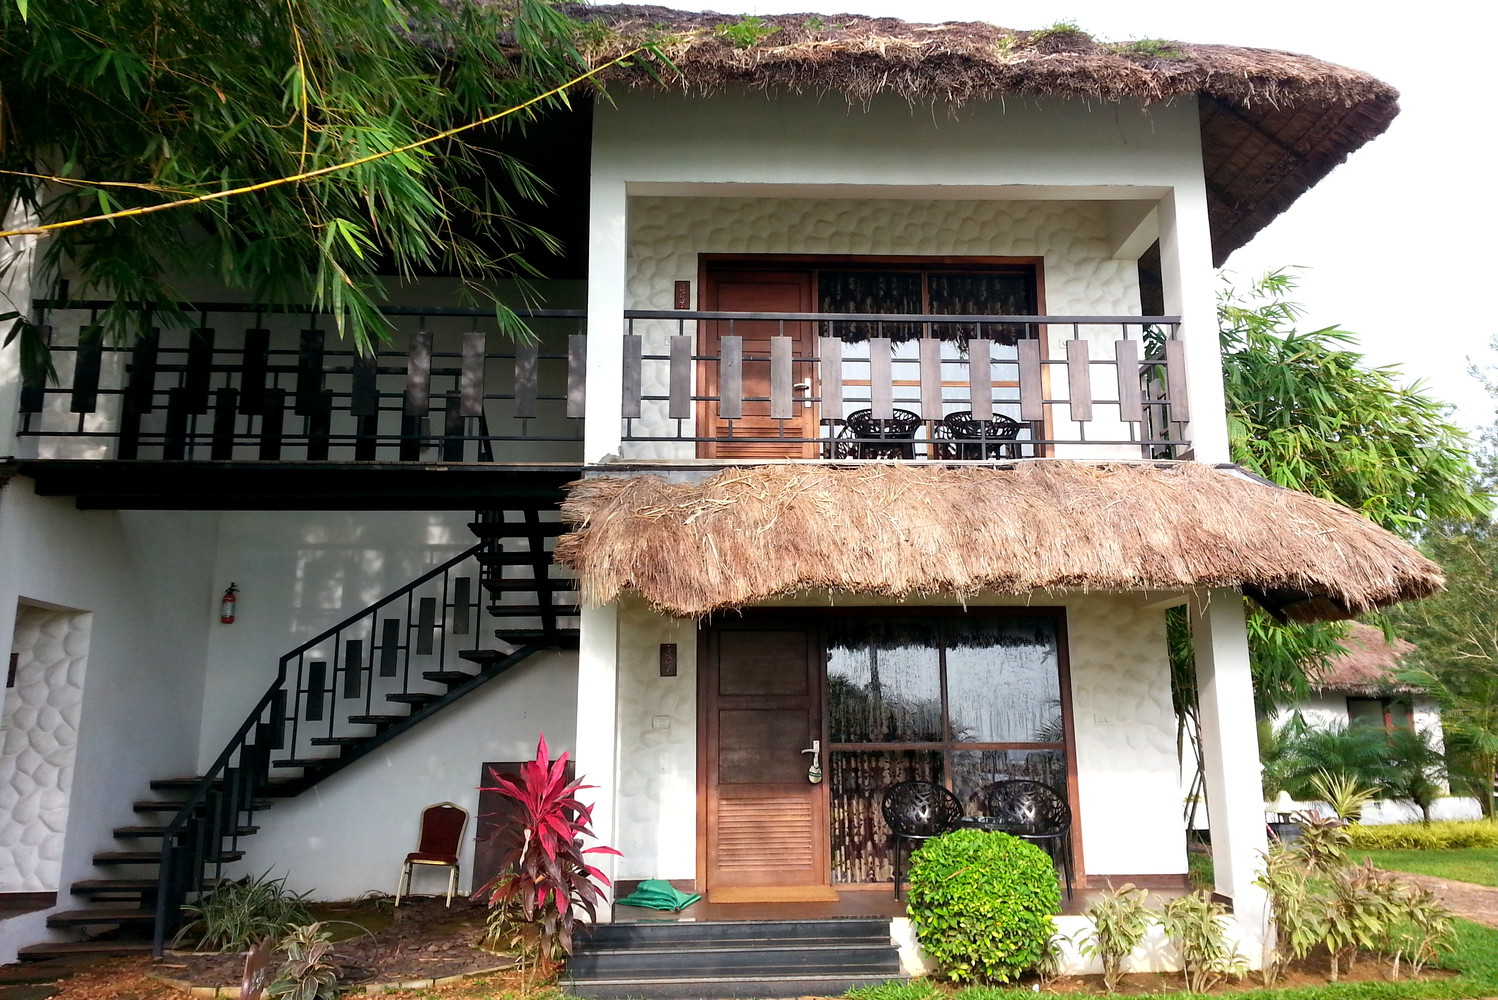 Two-storey building with stairs, wooden doors, and thatched awnings